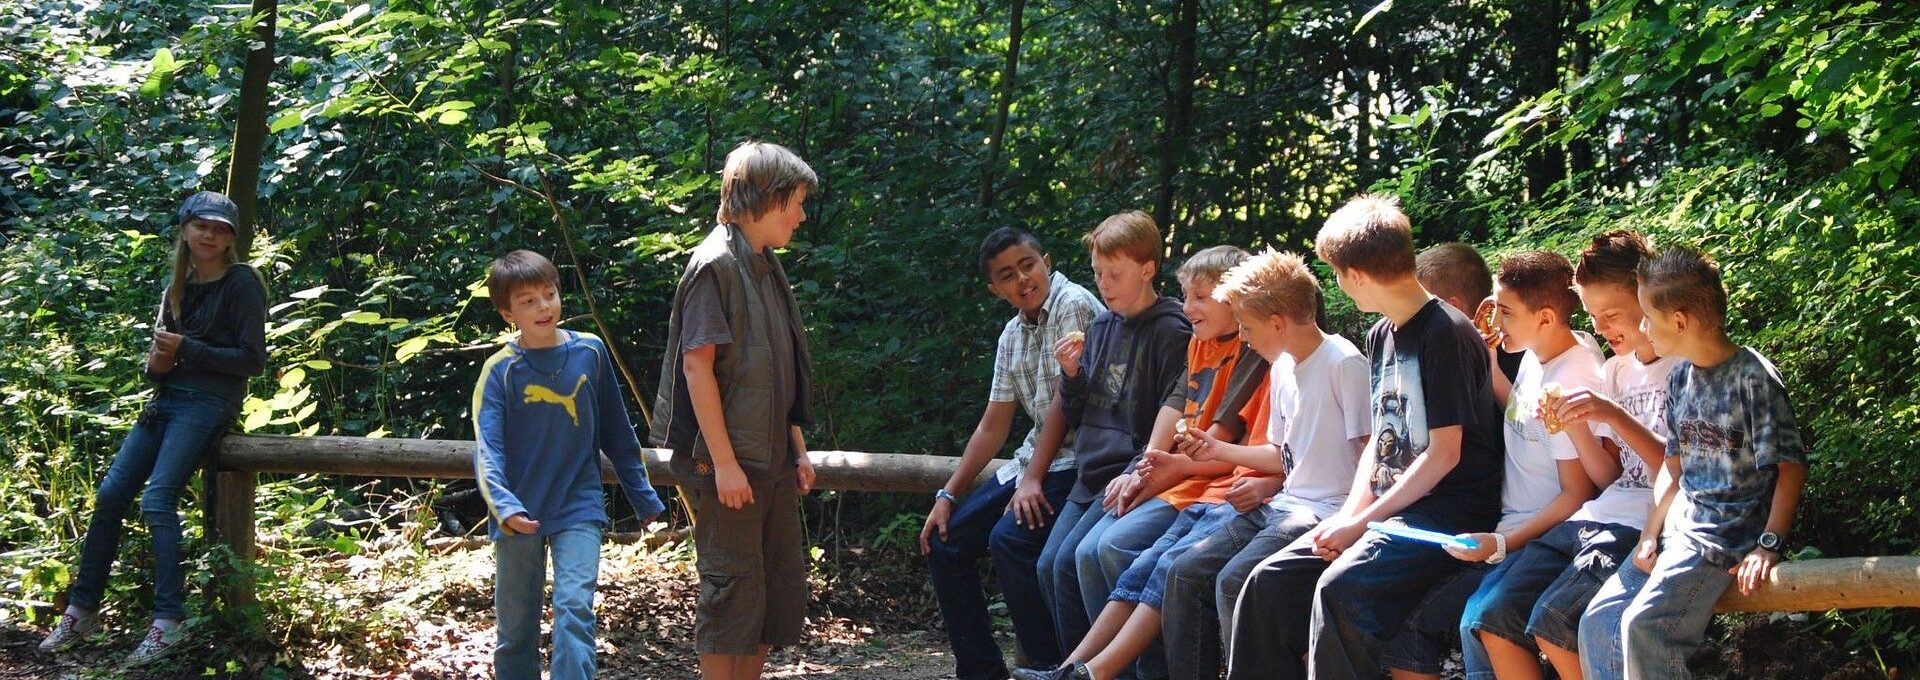 Group of teenagers in woodland